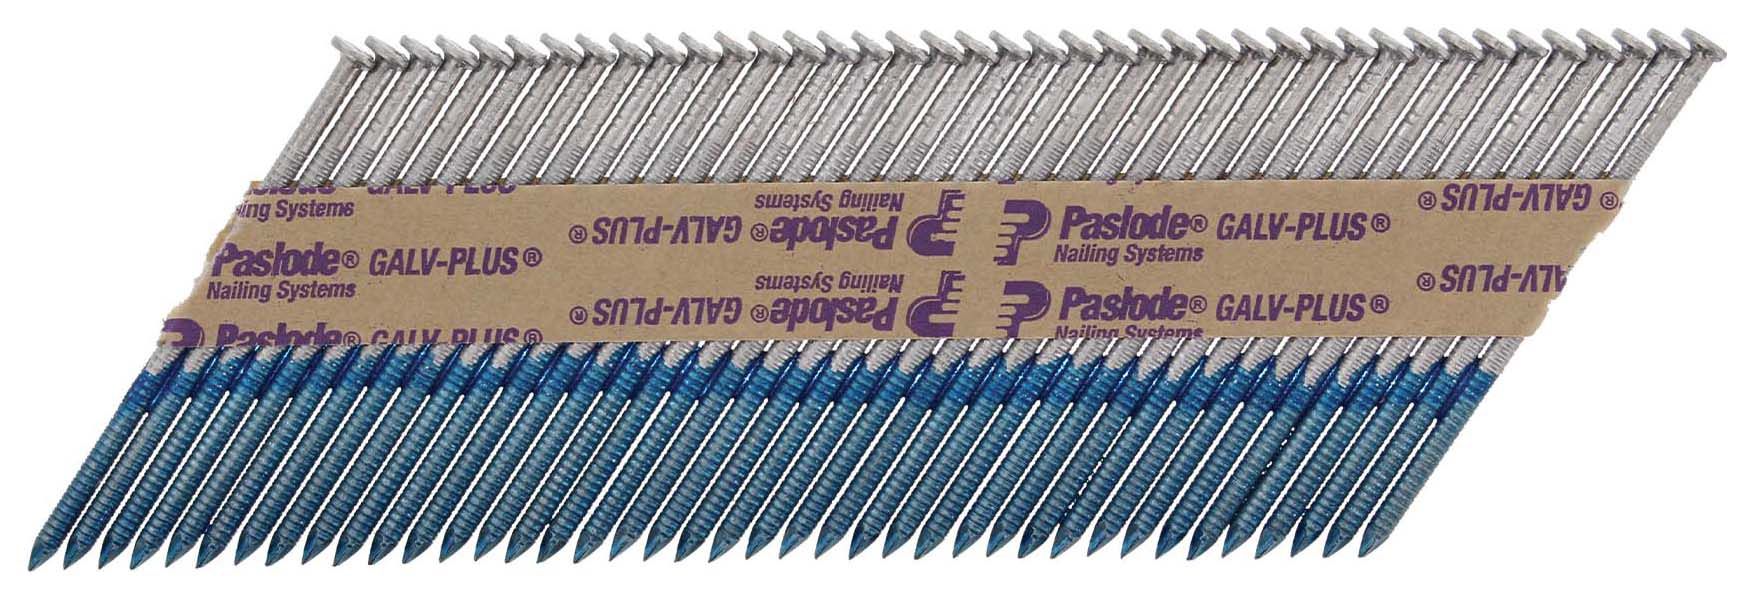 Paslode 360Xi 2.8mm x 63mm Galv-Plus Collated Nails + 1 Fuel Cell - Box of 1100